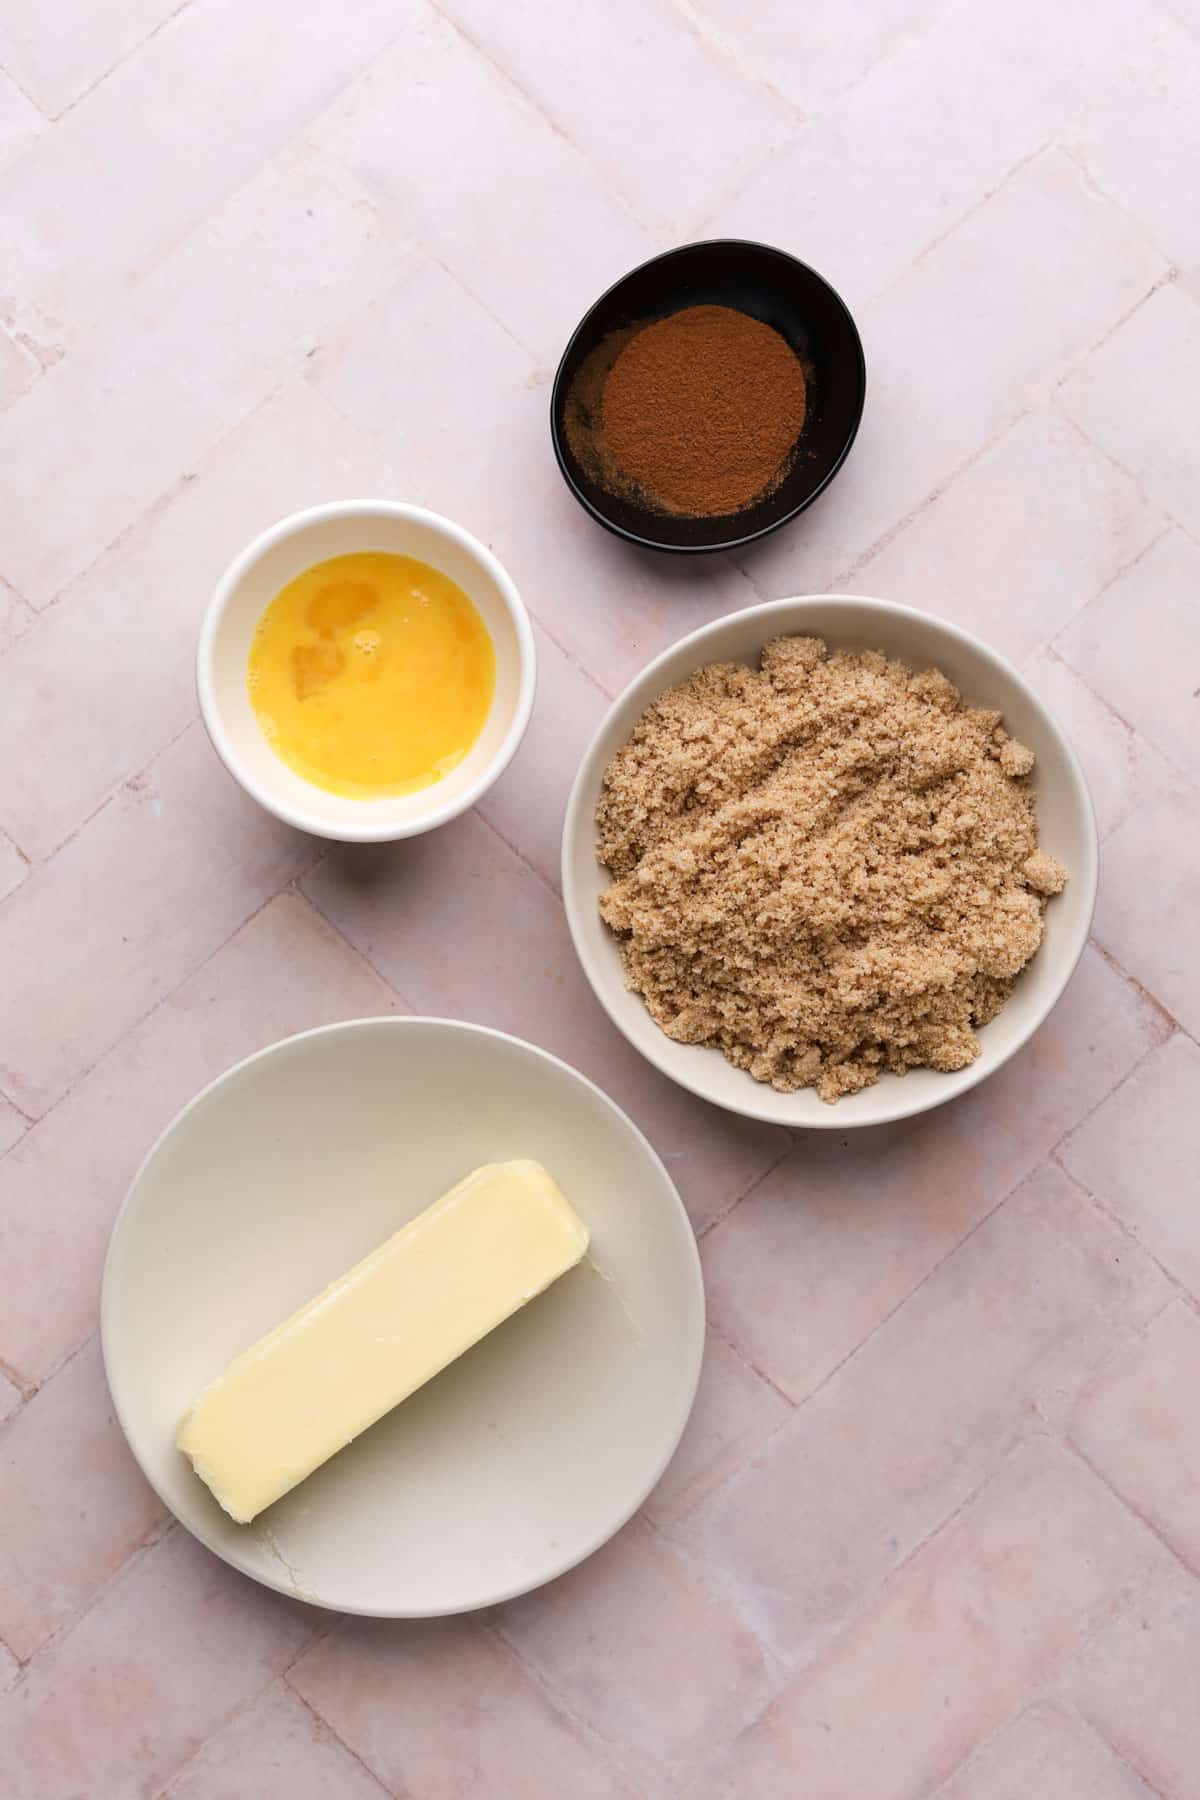 Filling ingredients for homemade cinnamon rolls in bowls on a flat surface.